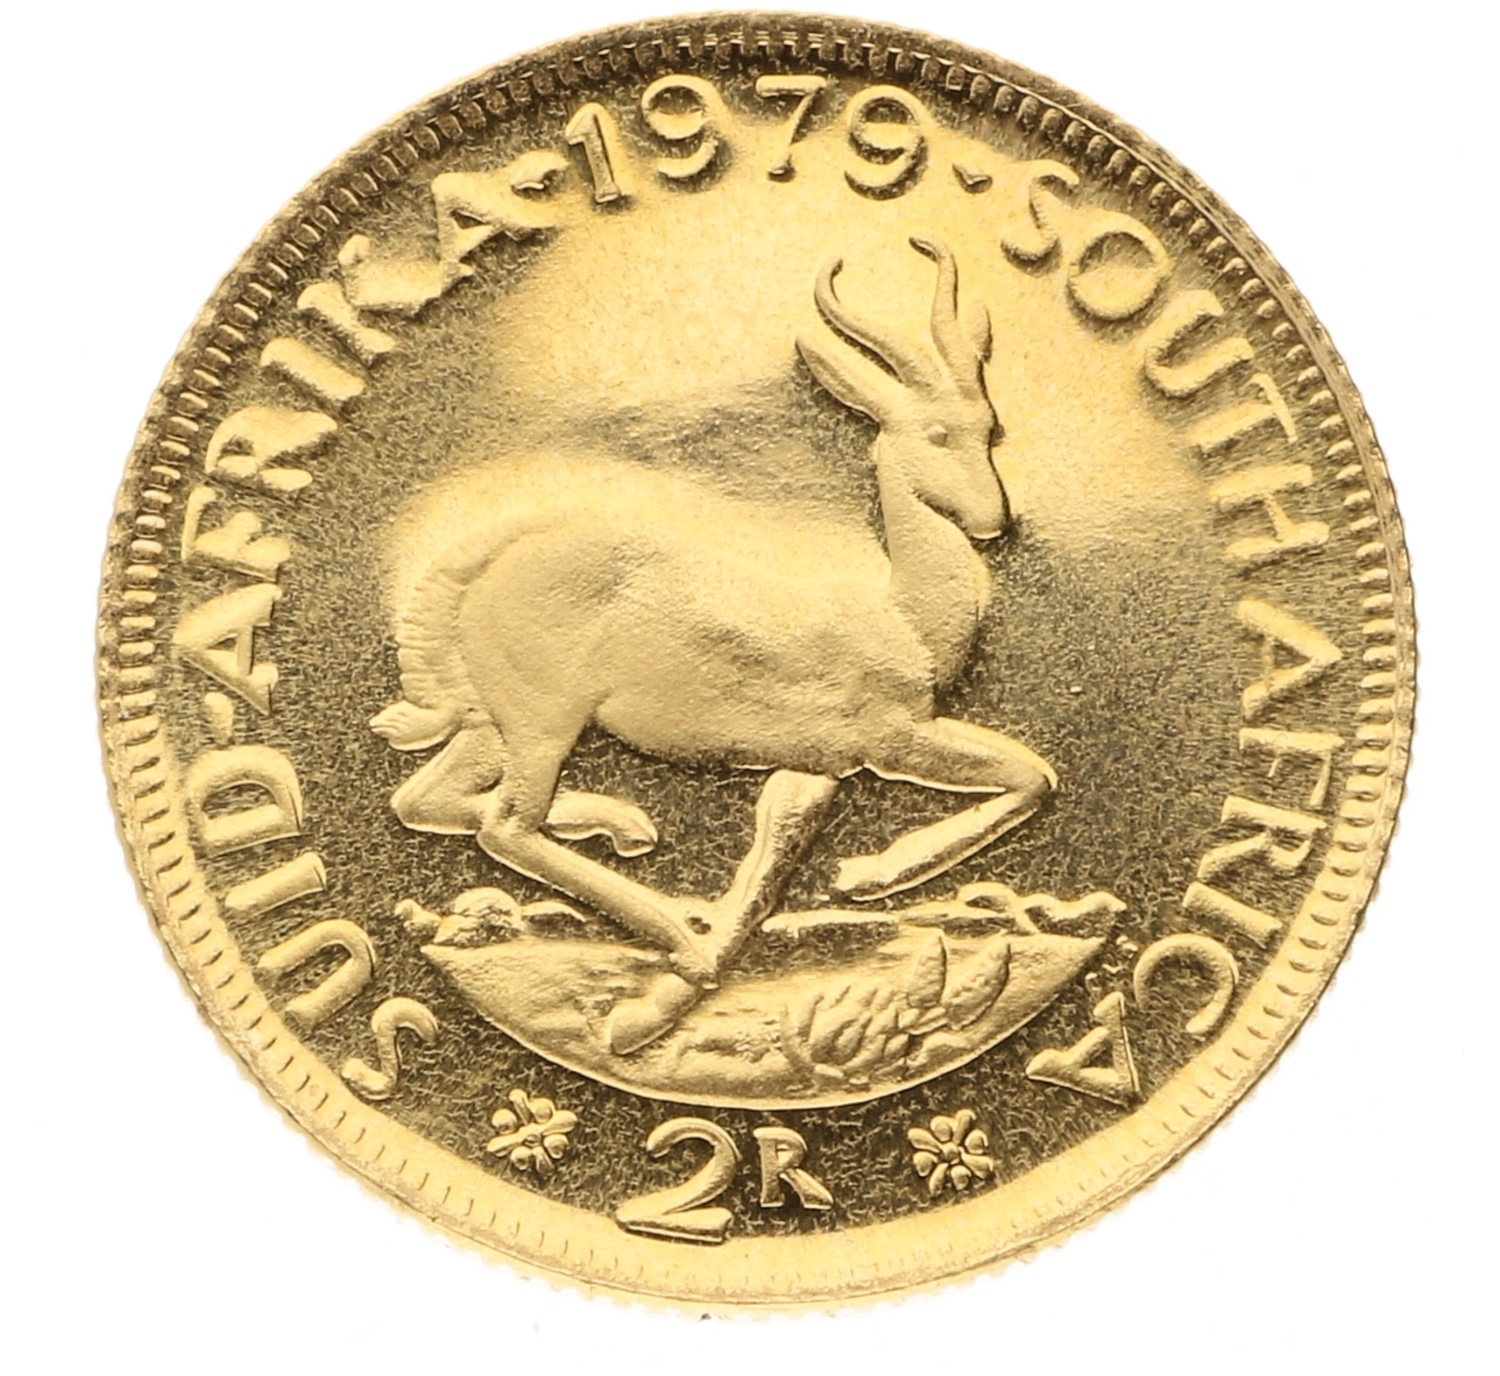 2 Rand - South Africa - 1979